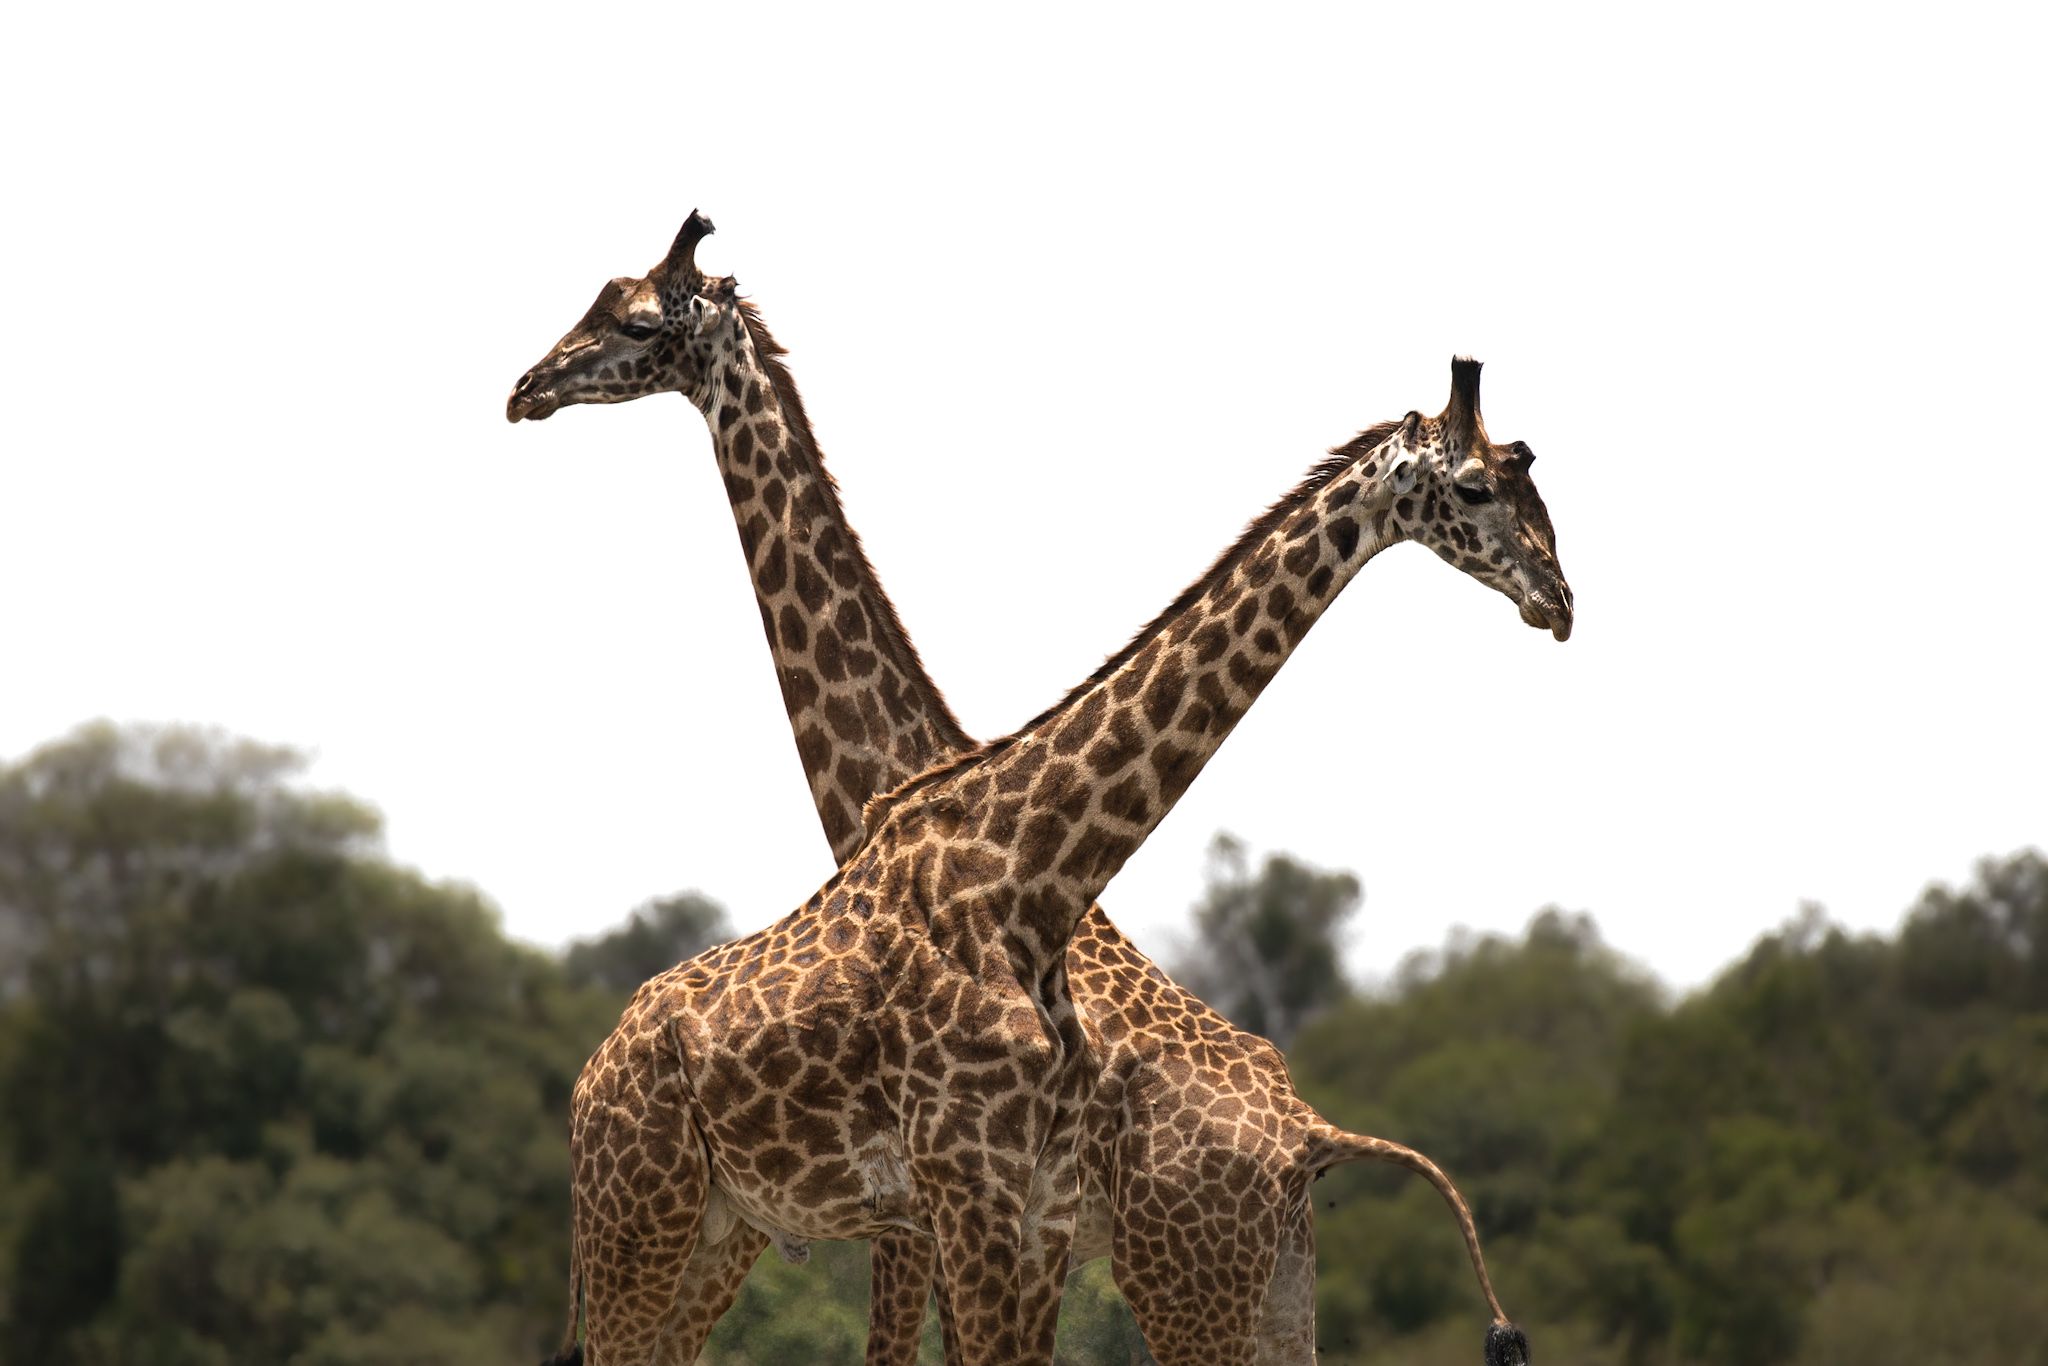 The Giraffe couple with a great formation of Love!